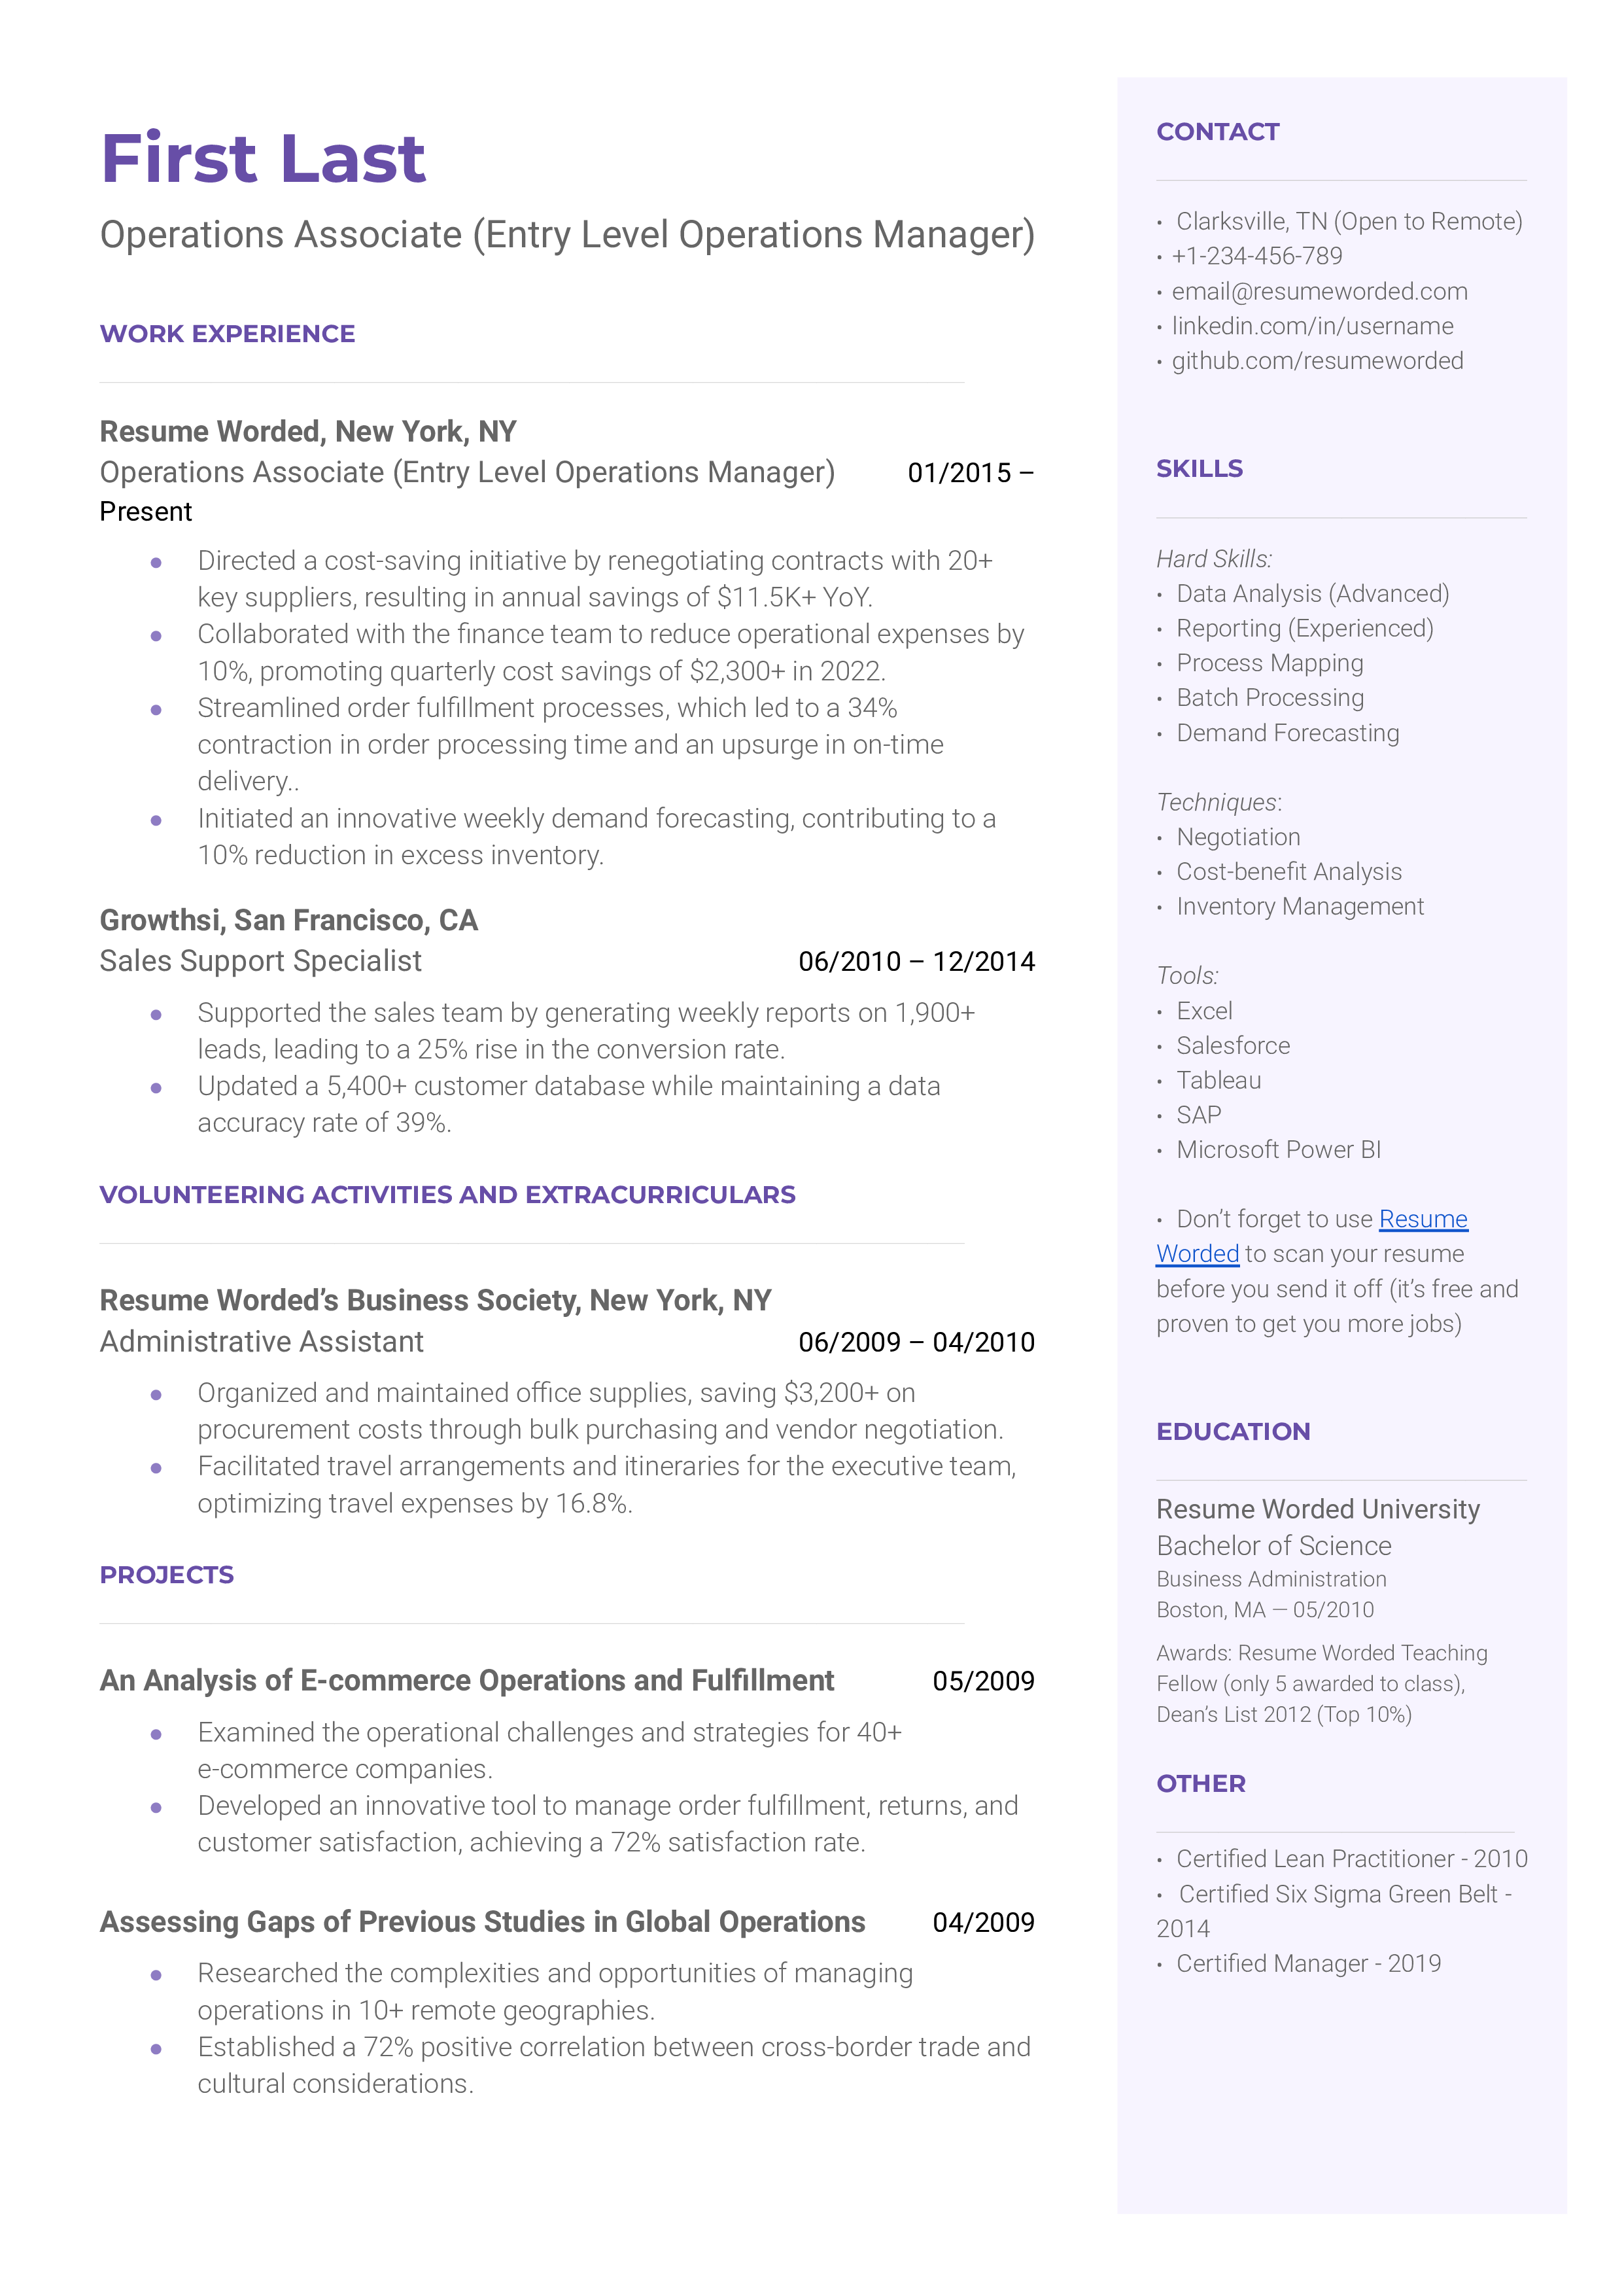 An organized resume for an Entry Level Operations Manager role.